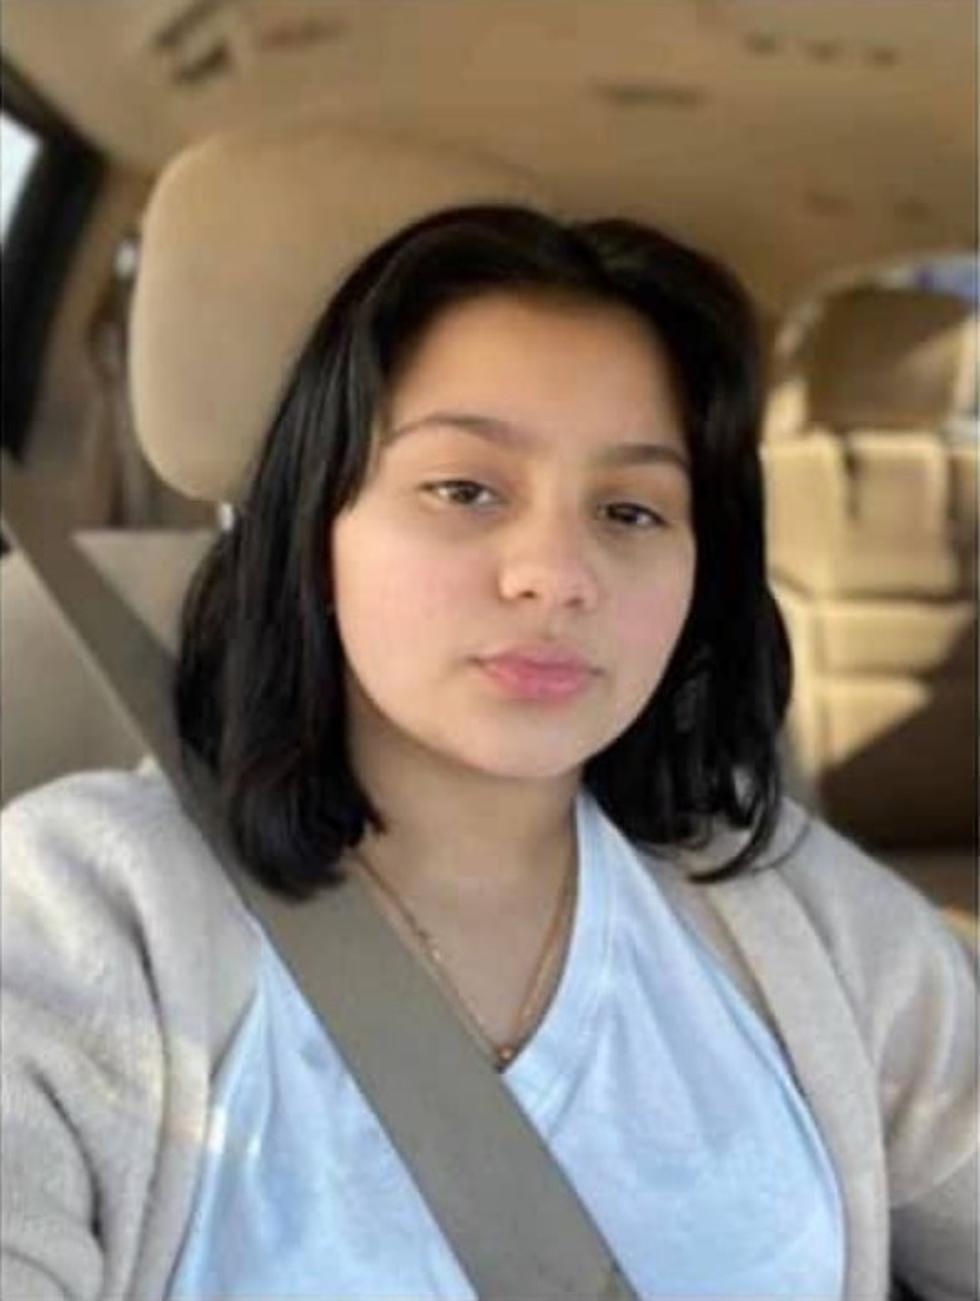 Lakewood Police searching for missing 13-year old girl